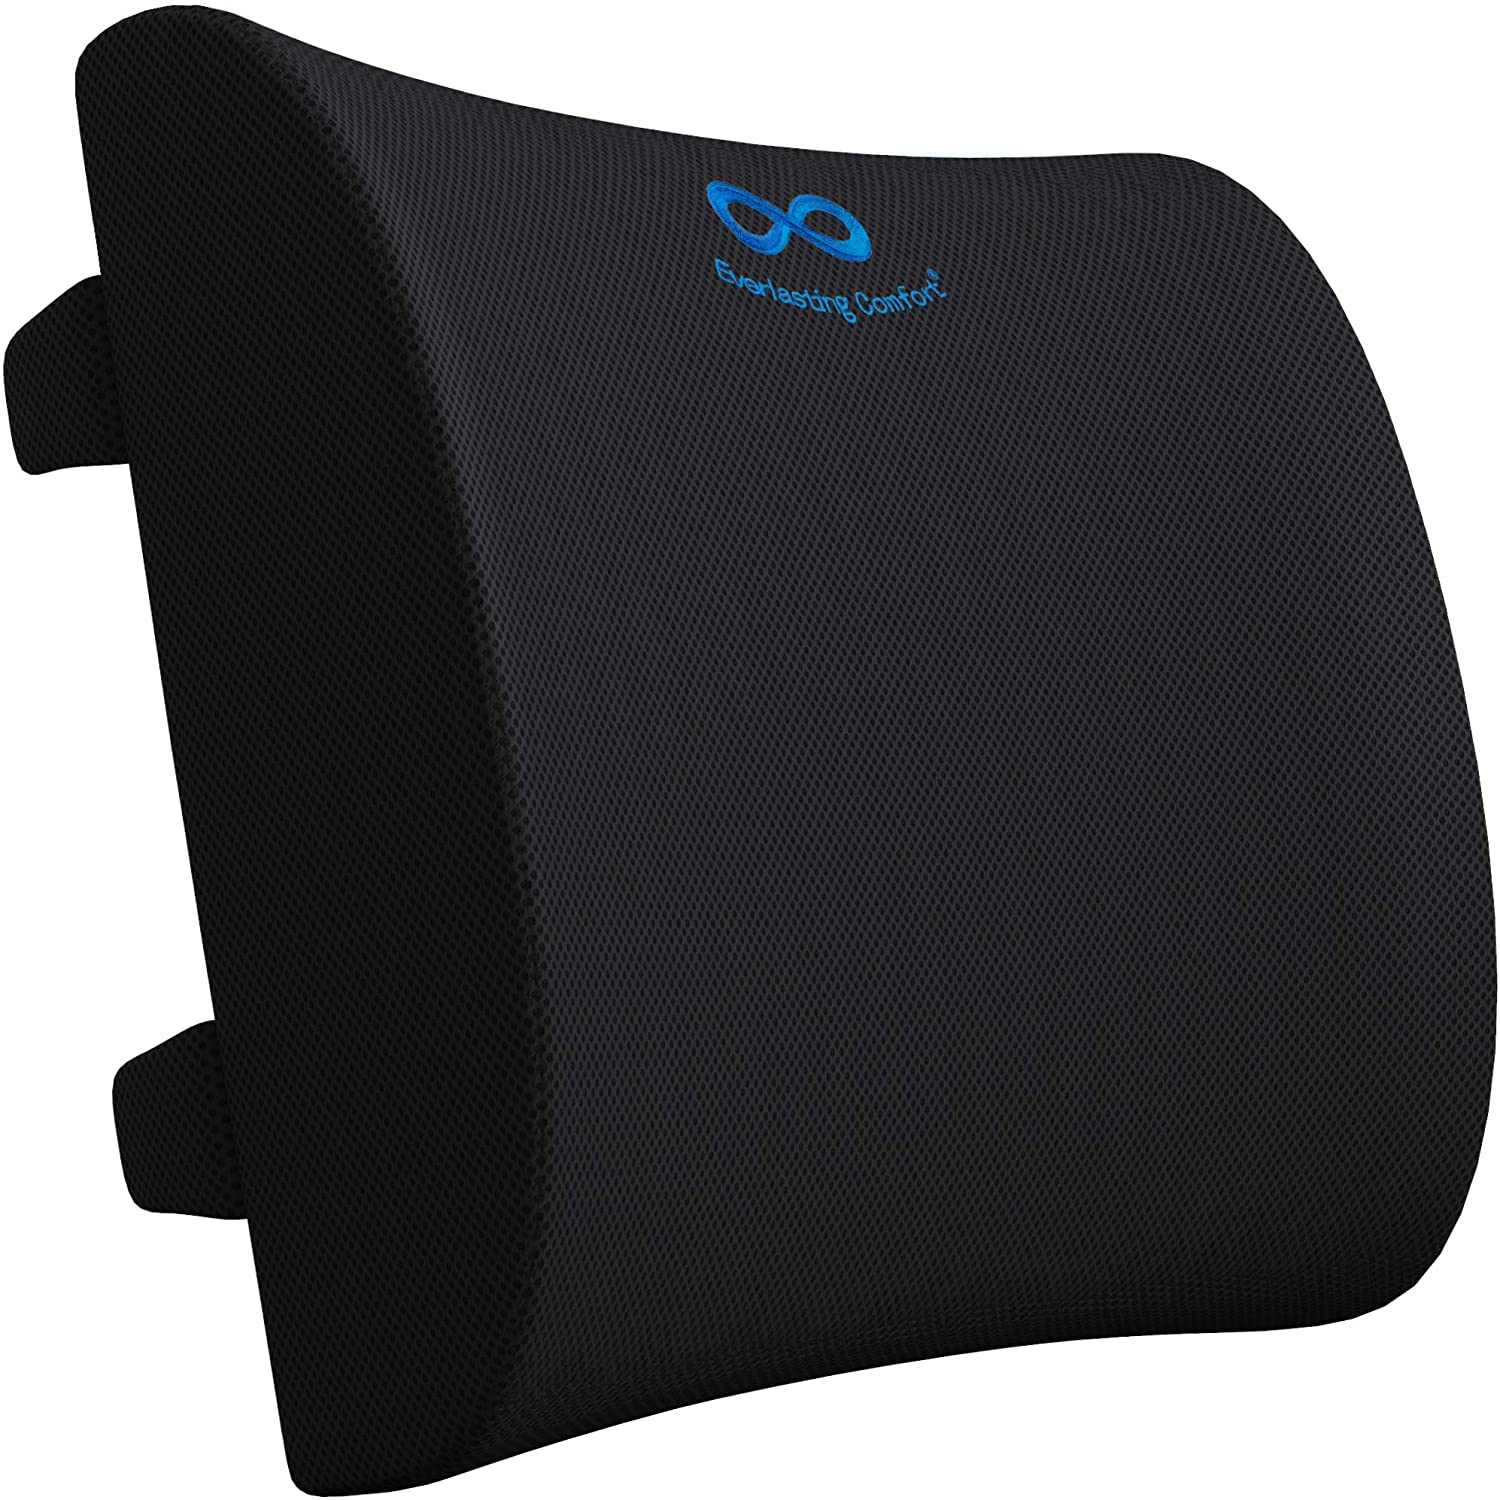 Benefits of Using Lumbar Support Pillow for Office Chair